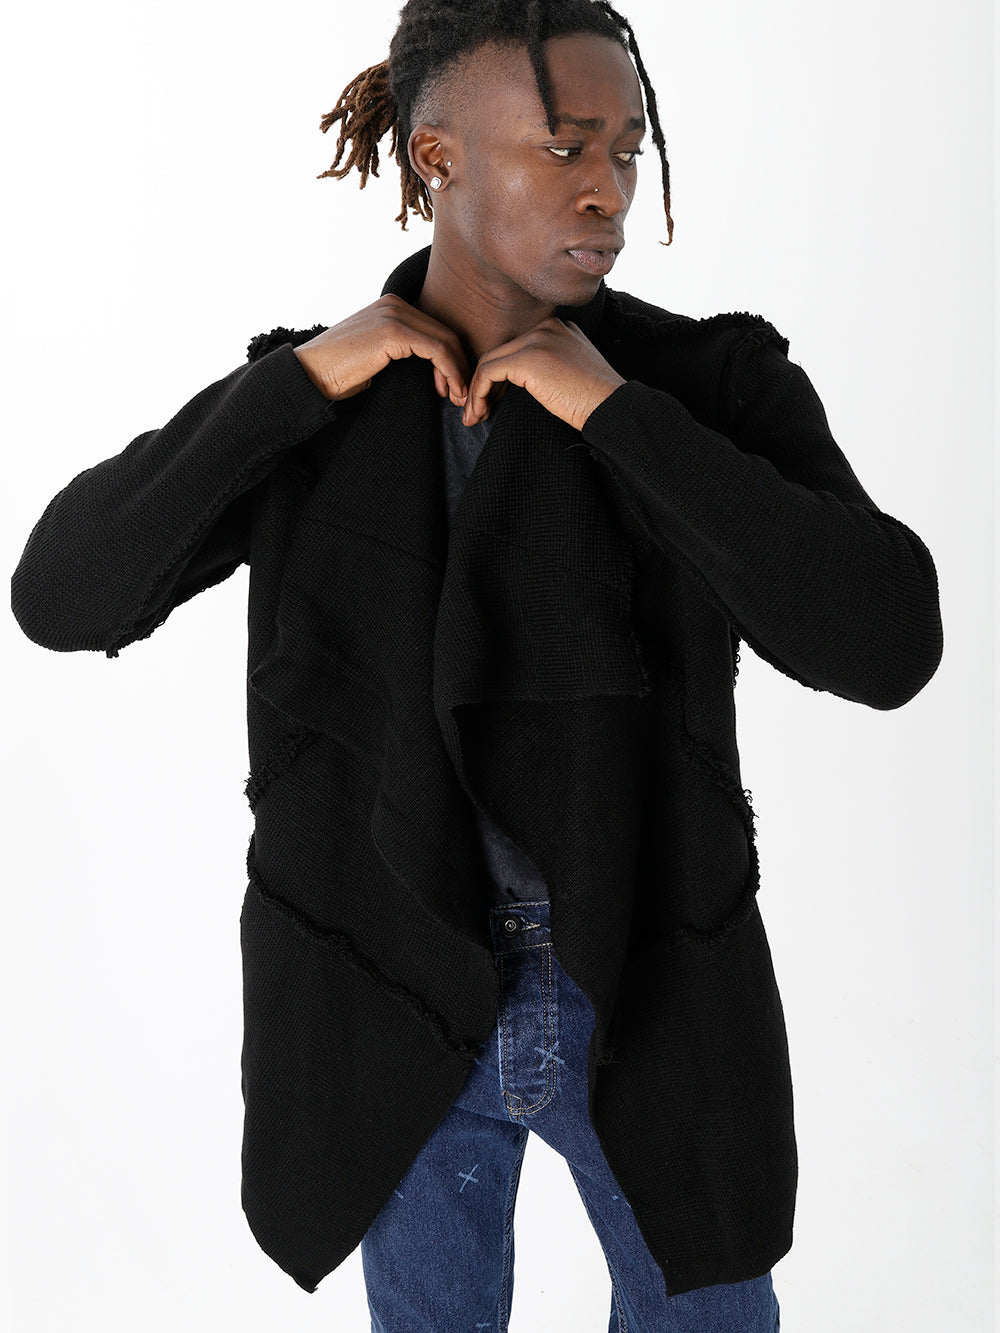 A man with dreadlocks wearing a HOODED DISTRESSED CARDIGAN // BLACK and skinny fit jeans.